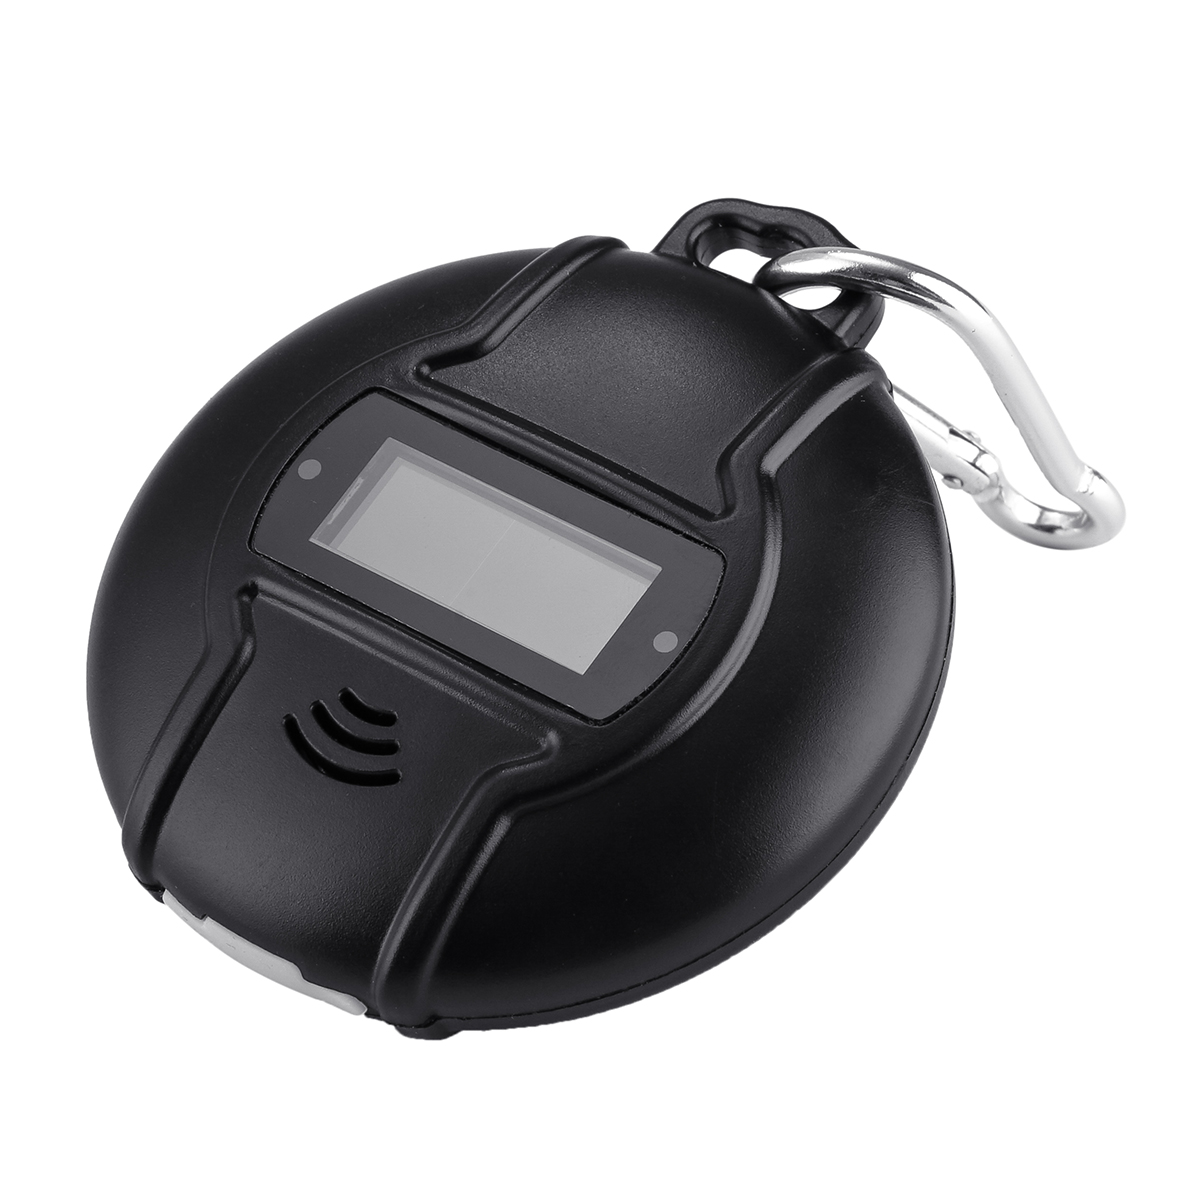 Solar-Drive-Mouse-Portable-Compass-Ultrasonic-Multifunction-Electronic-Mosquito-Repellent-Device-1276670-5